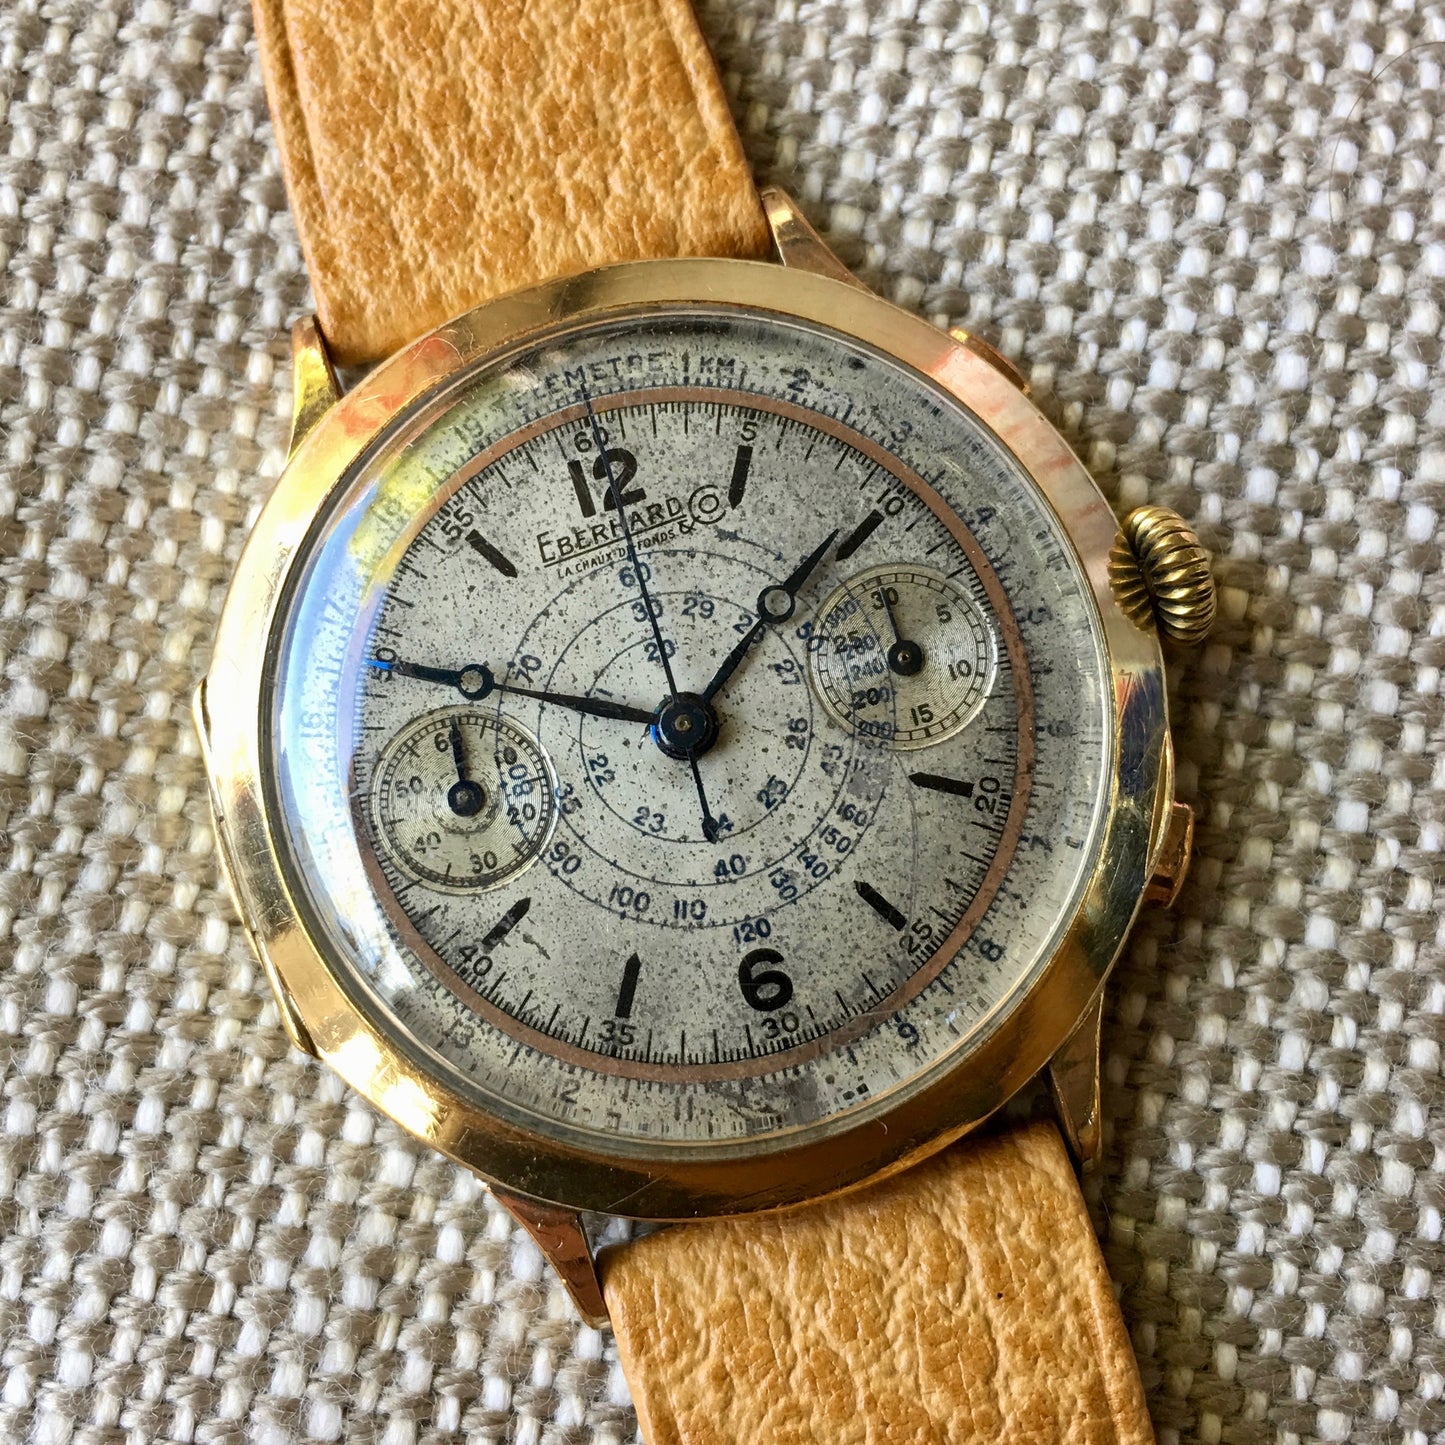 Vintage Eberhard Chronograph 5481 Gold Plated Manual Wind 40mm Large Wristwatch 1940's - Hashtag Watch Company